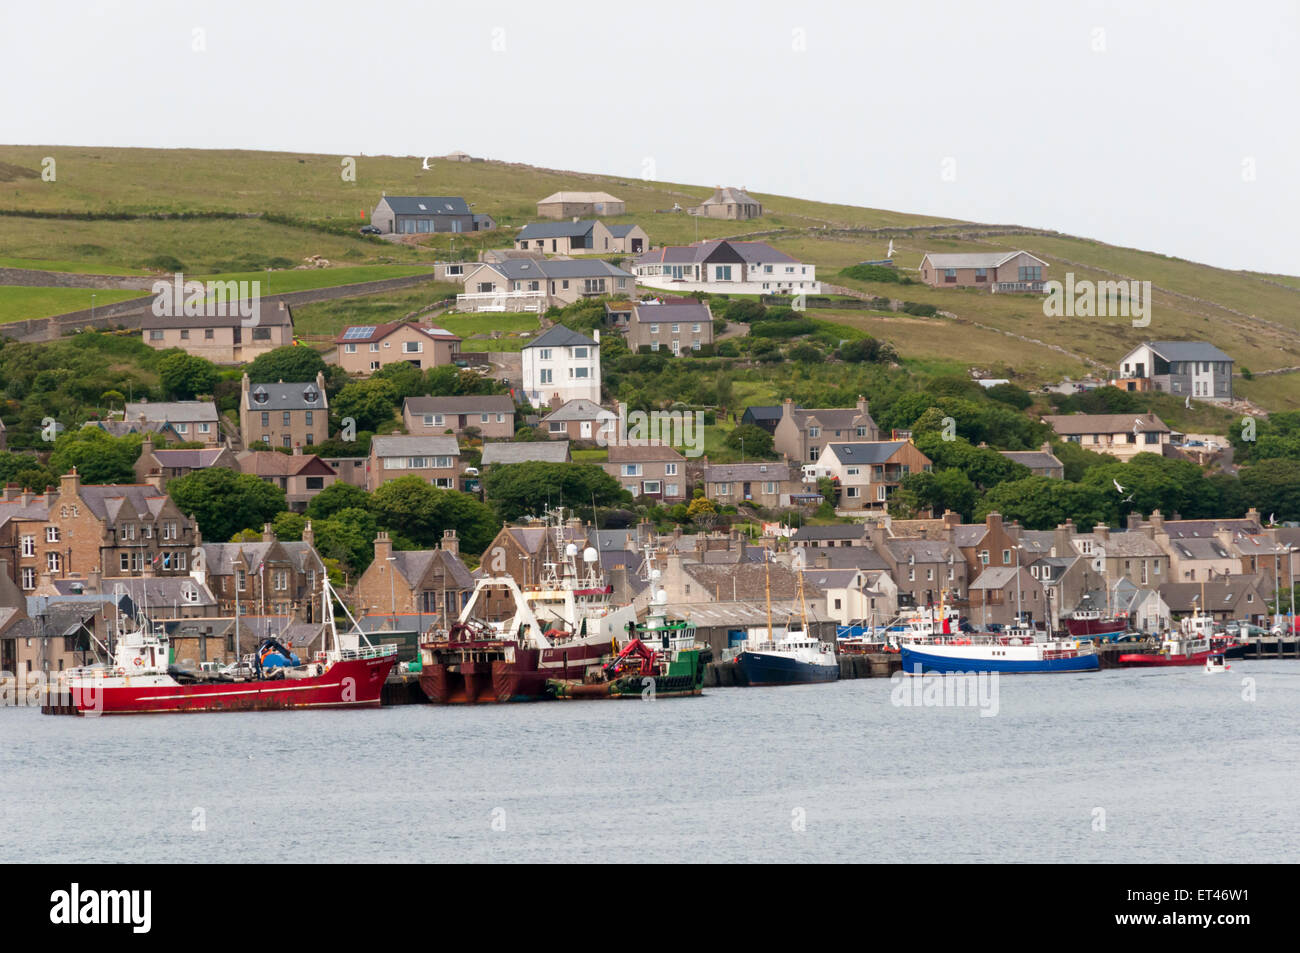 The town of Stromness on Orkney Mainland, seen from the sea. Stock Photo